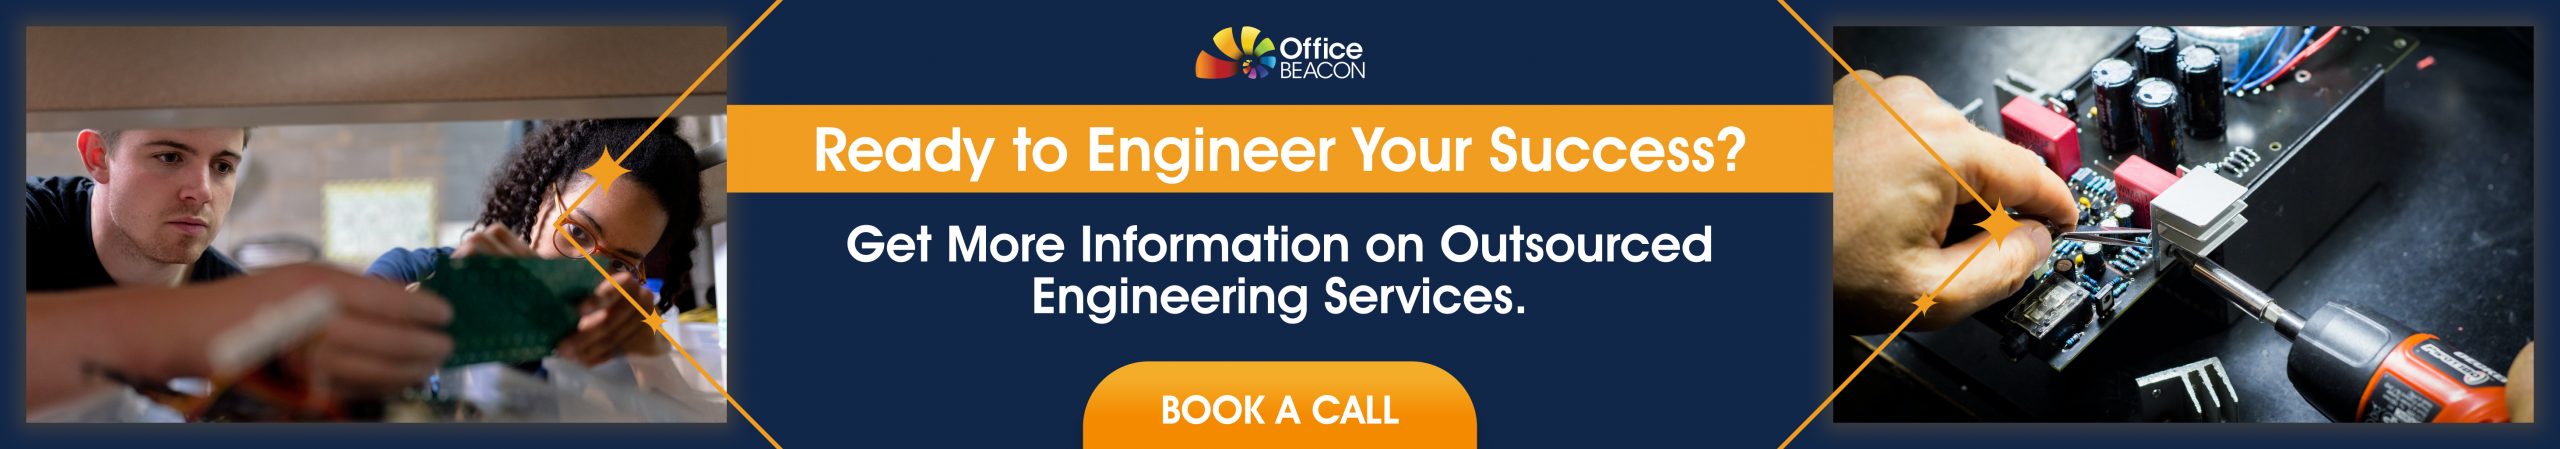 outsourced engineering services